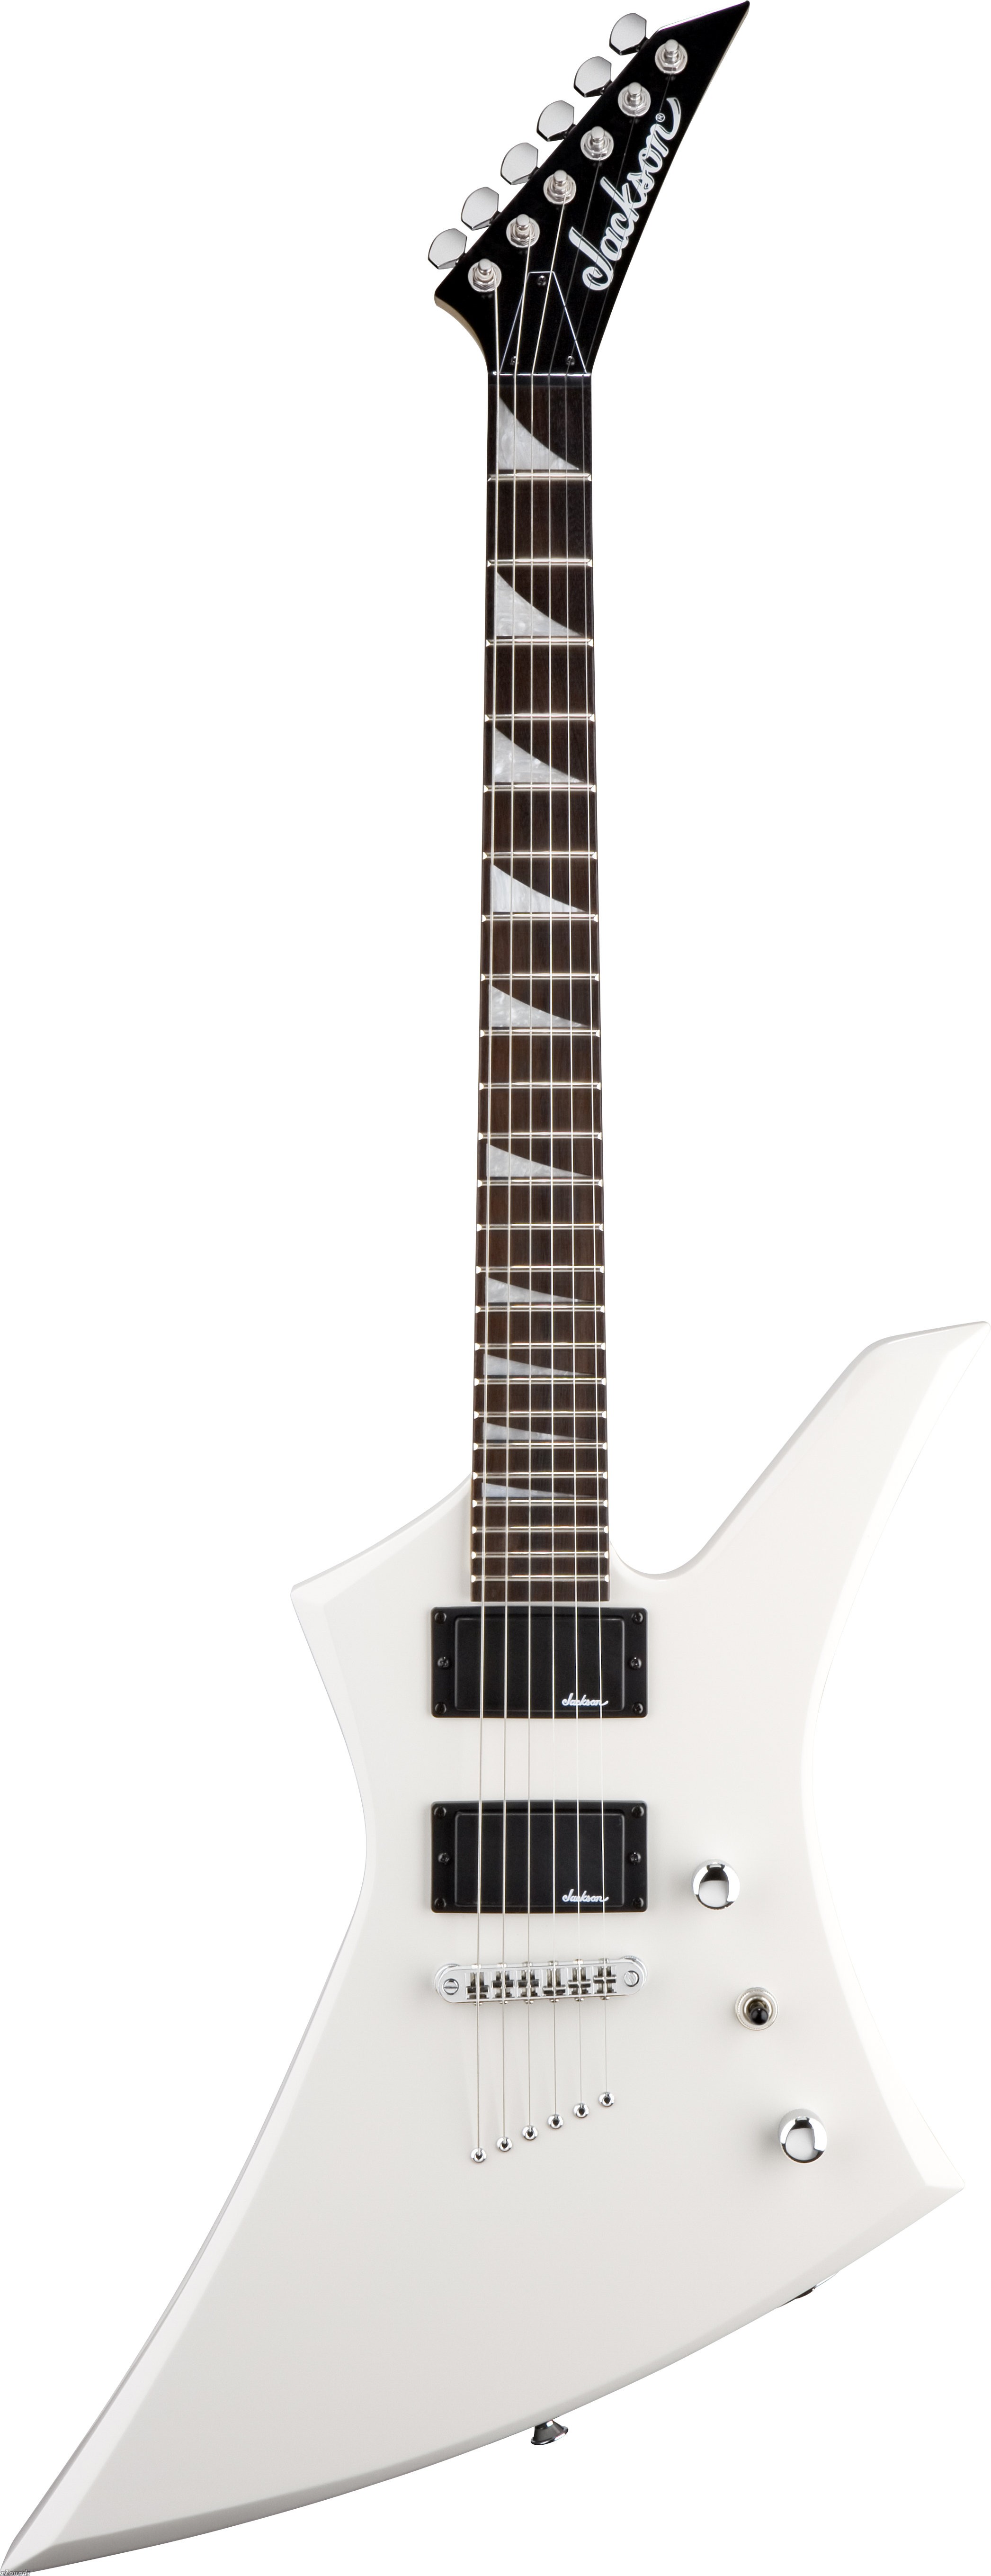 The Jackson JS32T has a solid alder body with a bolt on 25 1 2” scale maple neck The Jackson neck es with a graphite nut which lends smooth string sway